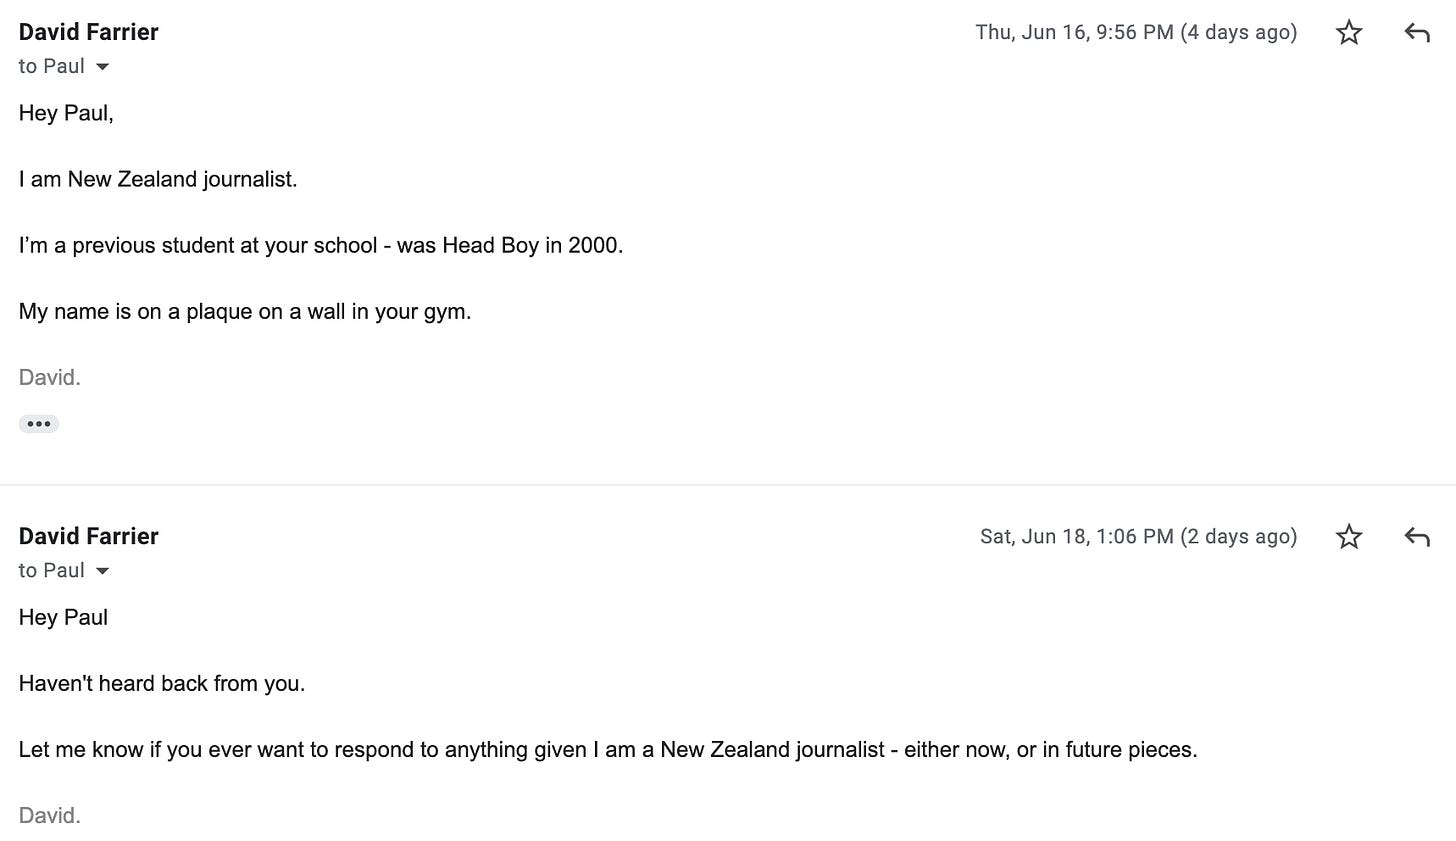 "Hey Paul  Haven't heard back from you.   Let me know if you ever want to respond to anything given I am a New Zealand journalist - either now, or in future pieces."